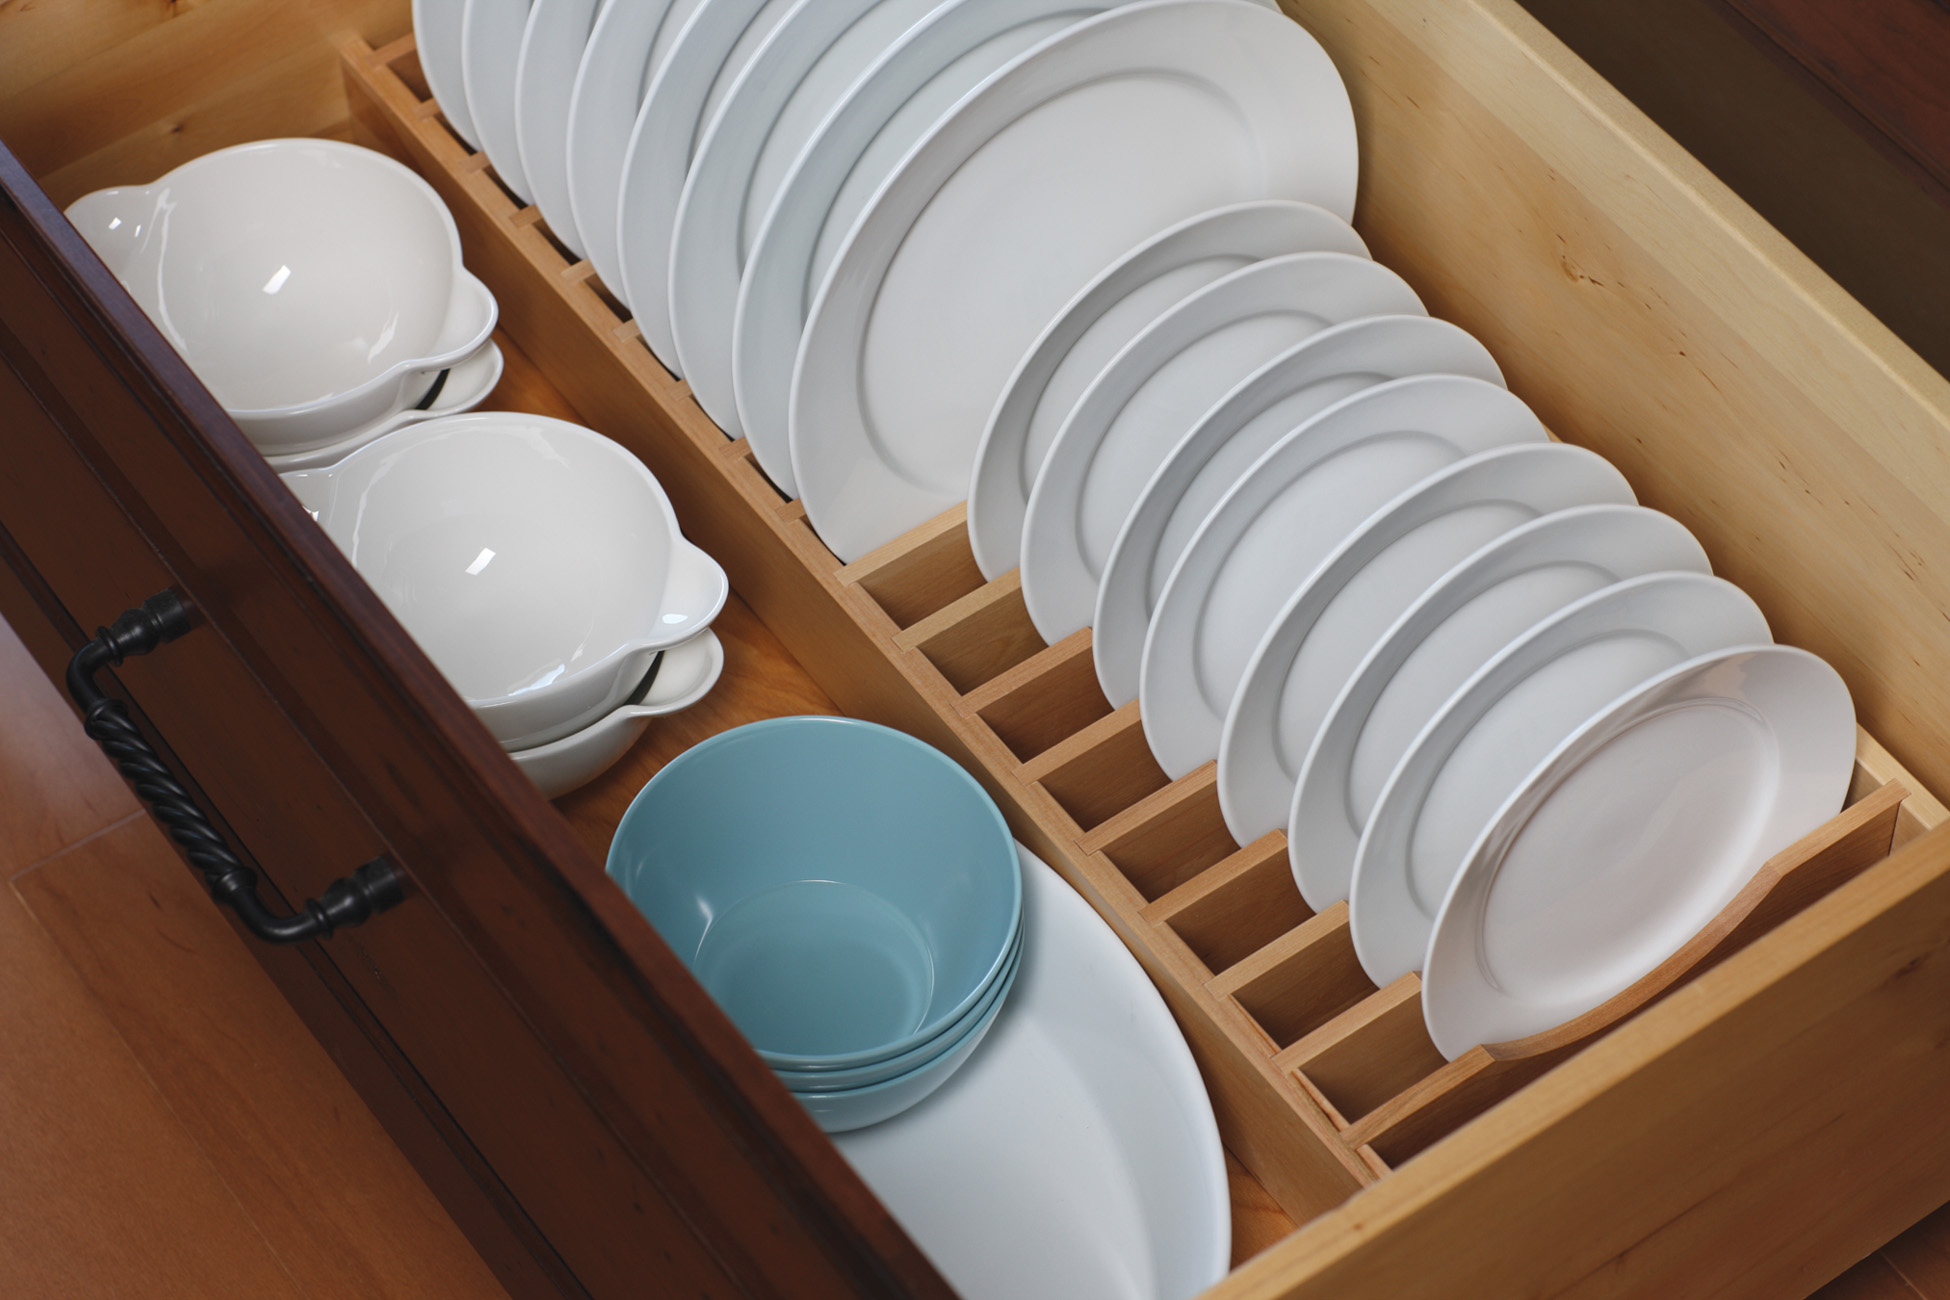 A Plate Rack Drawer from Dura Supreme creates a convenient location and a unique way to store an entire set of dishware within easy reach.